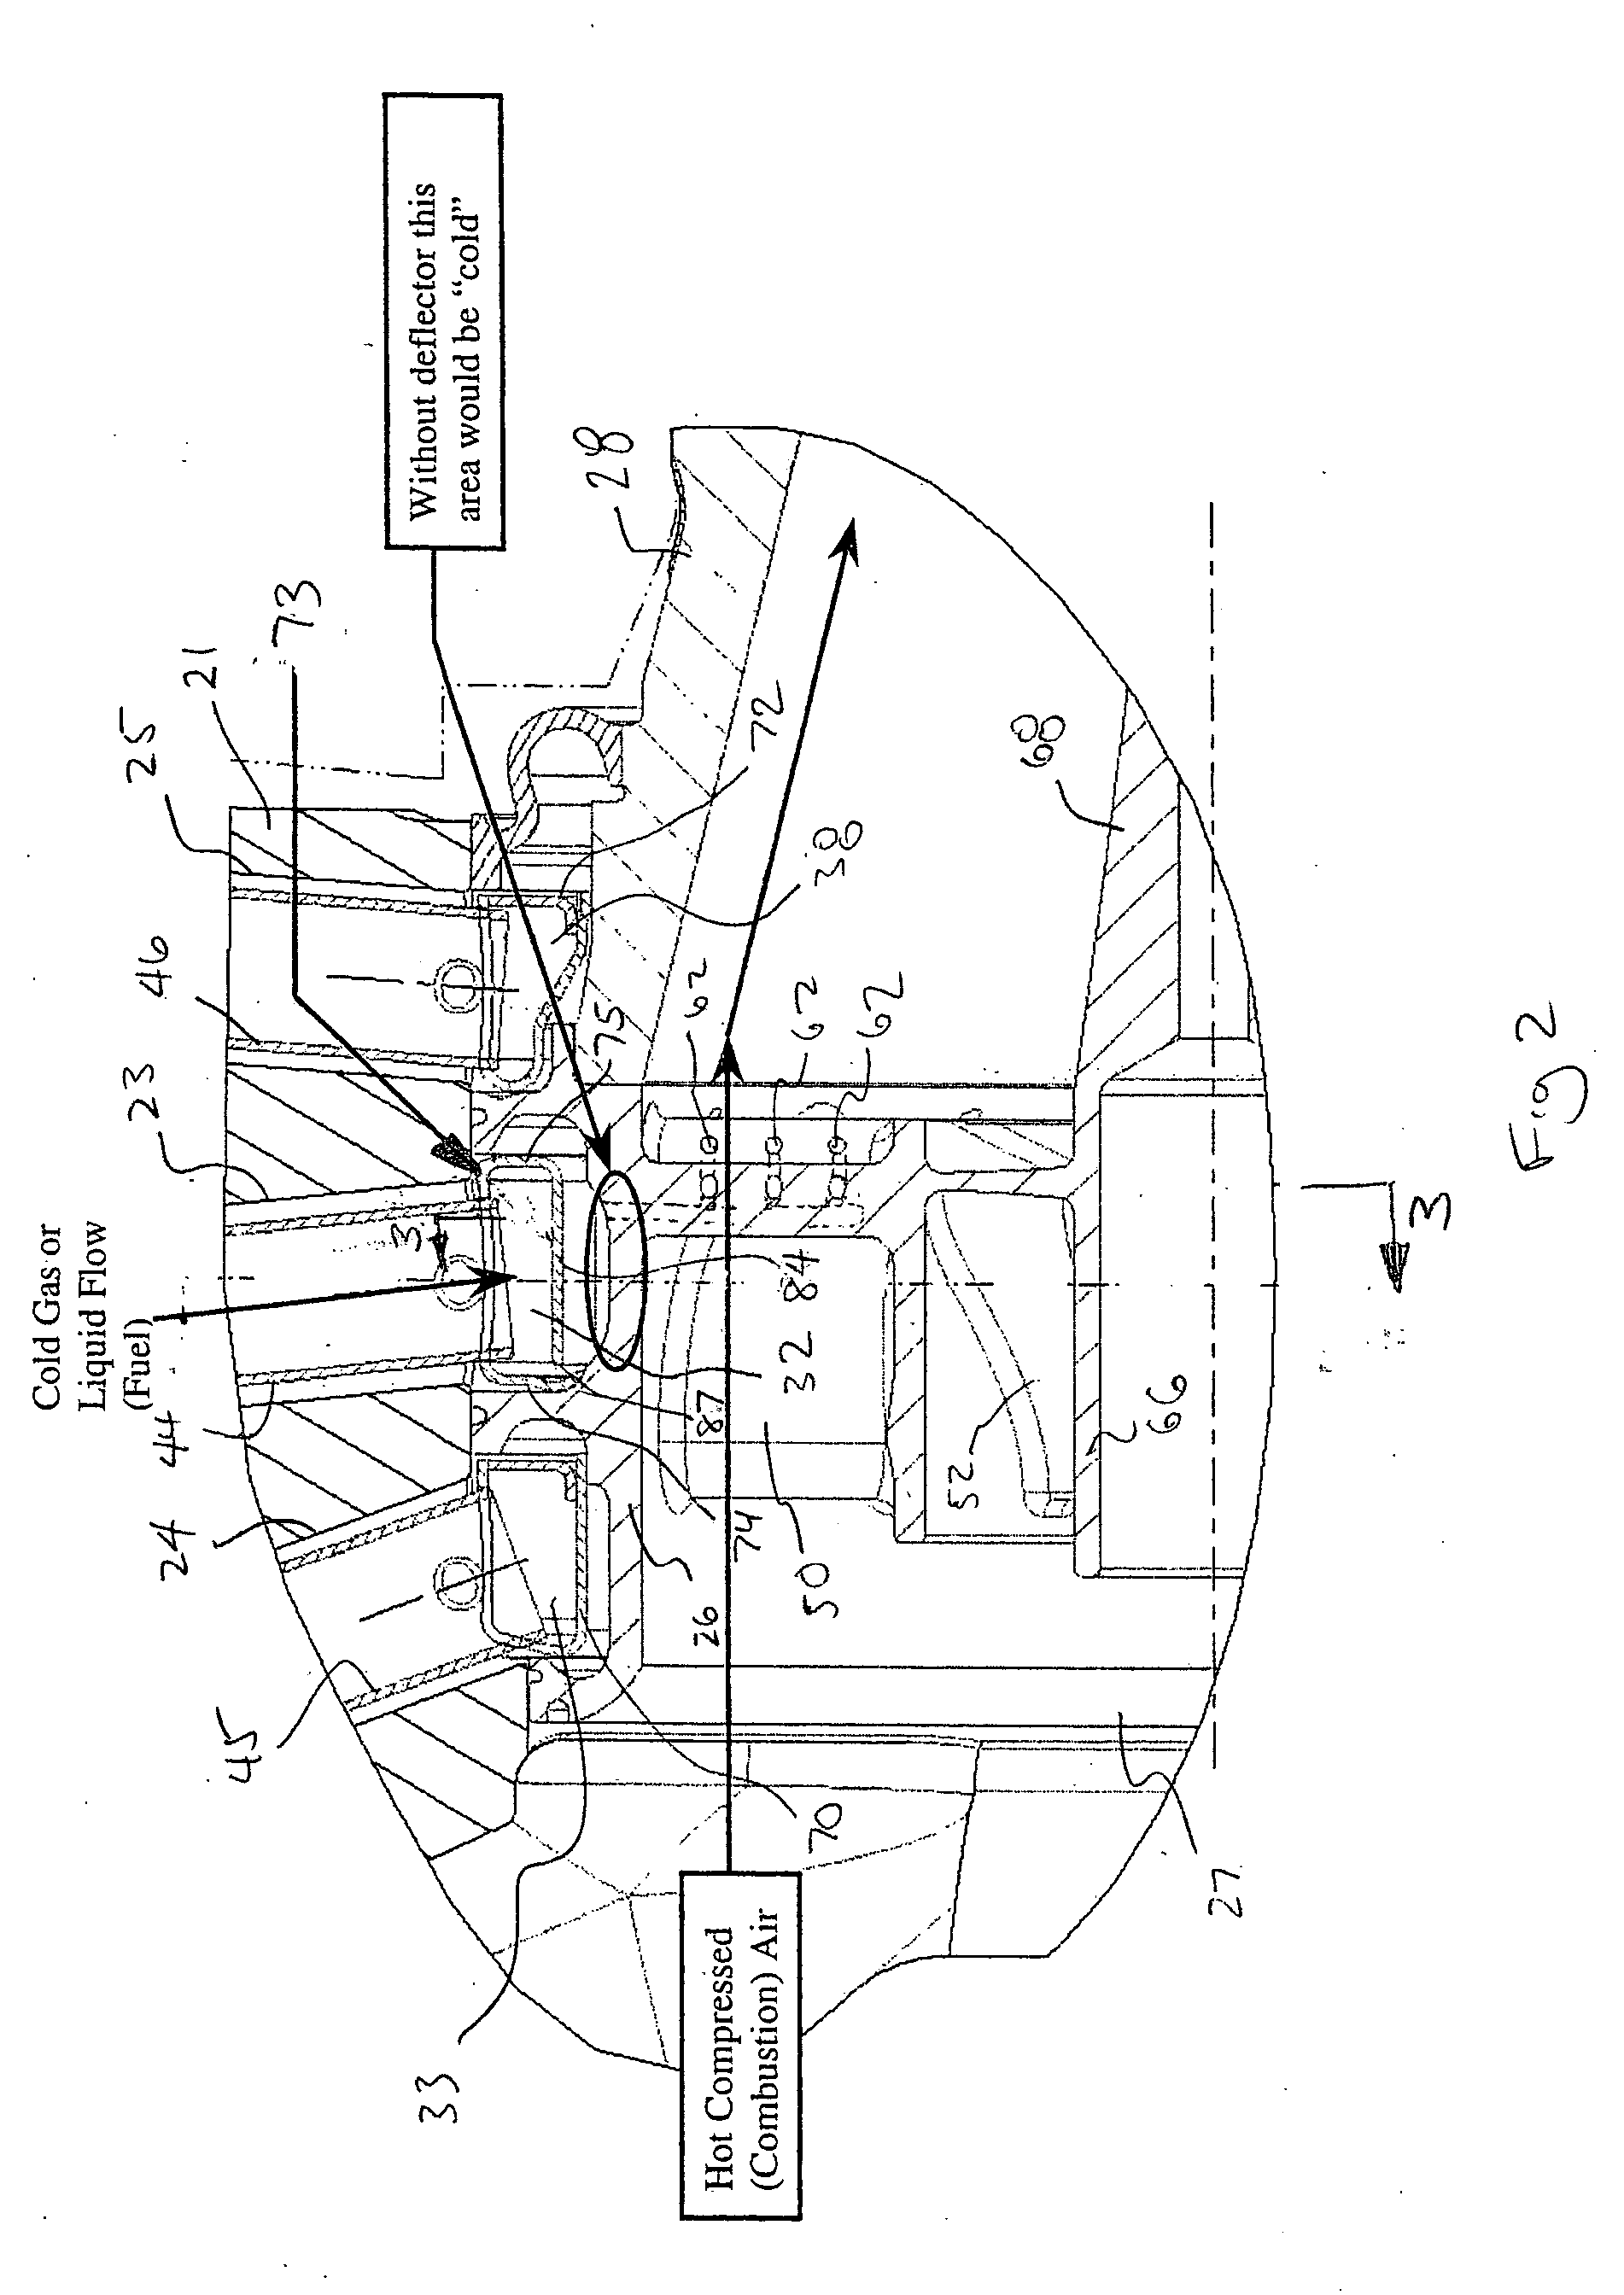 Nozzle assembly with fuel tube deflector